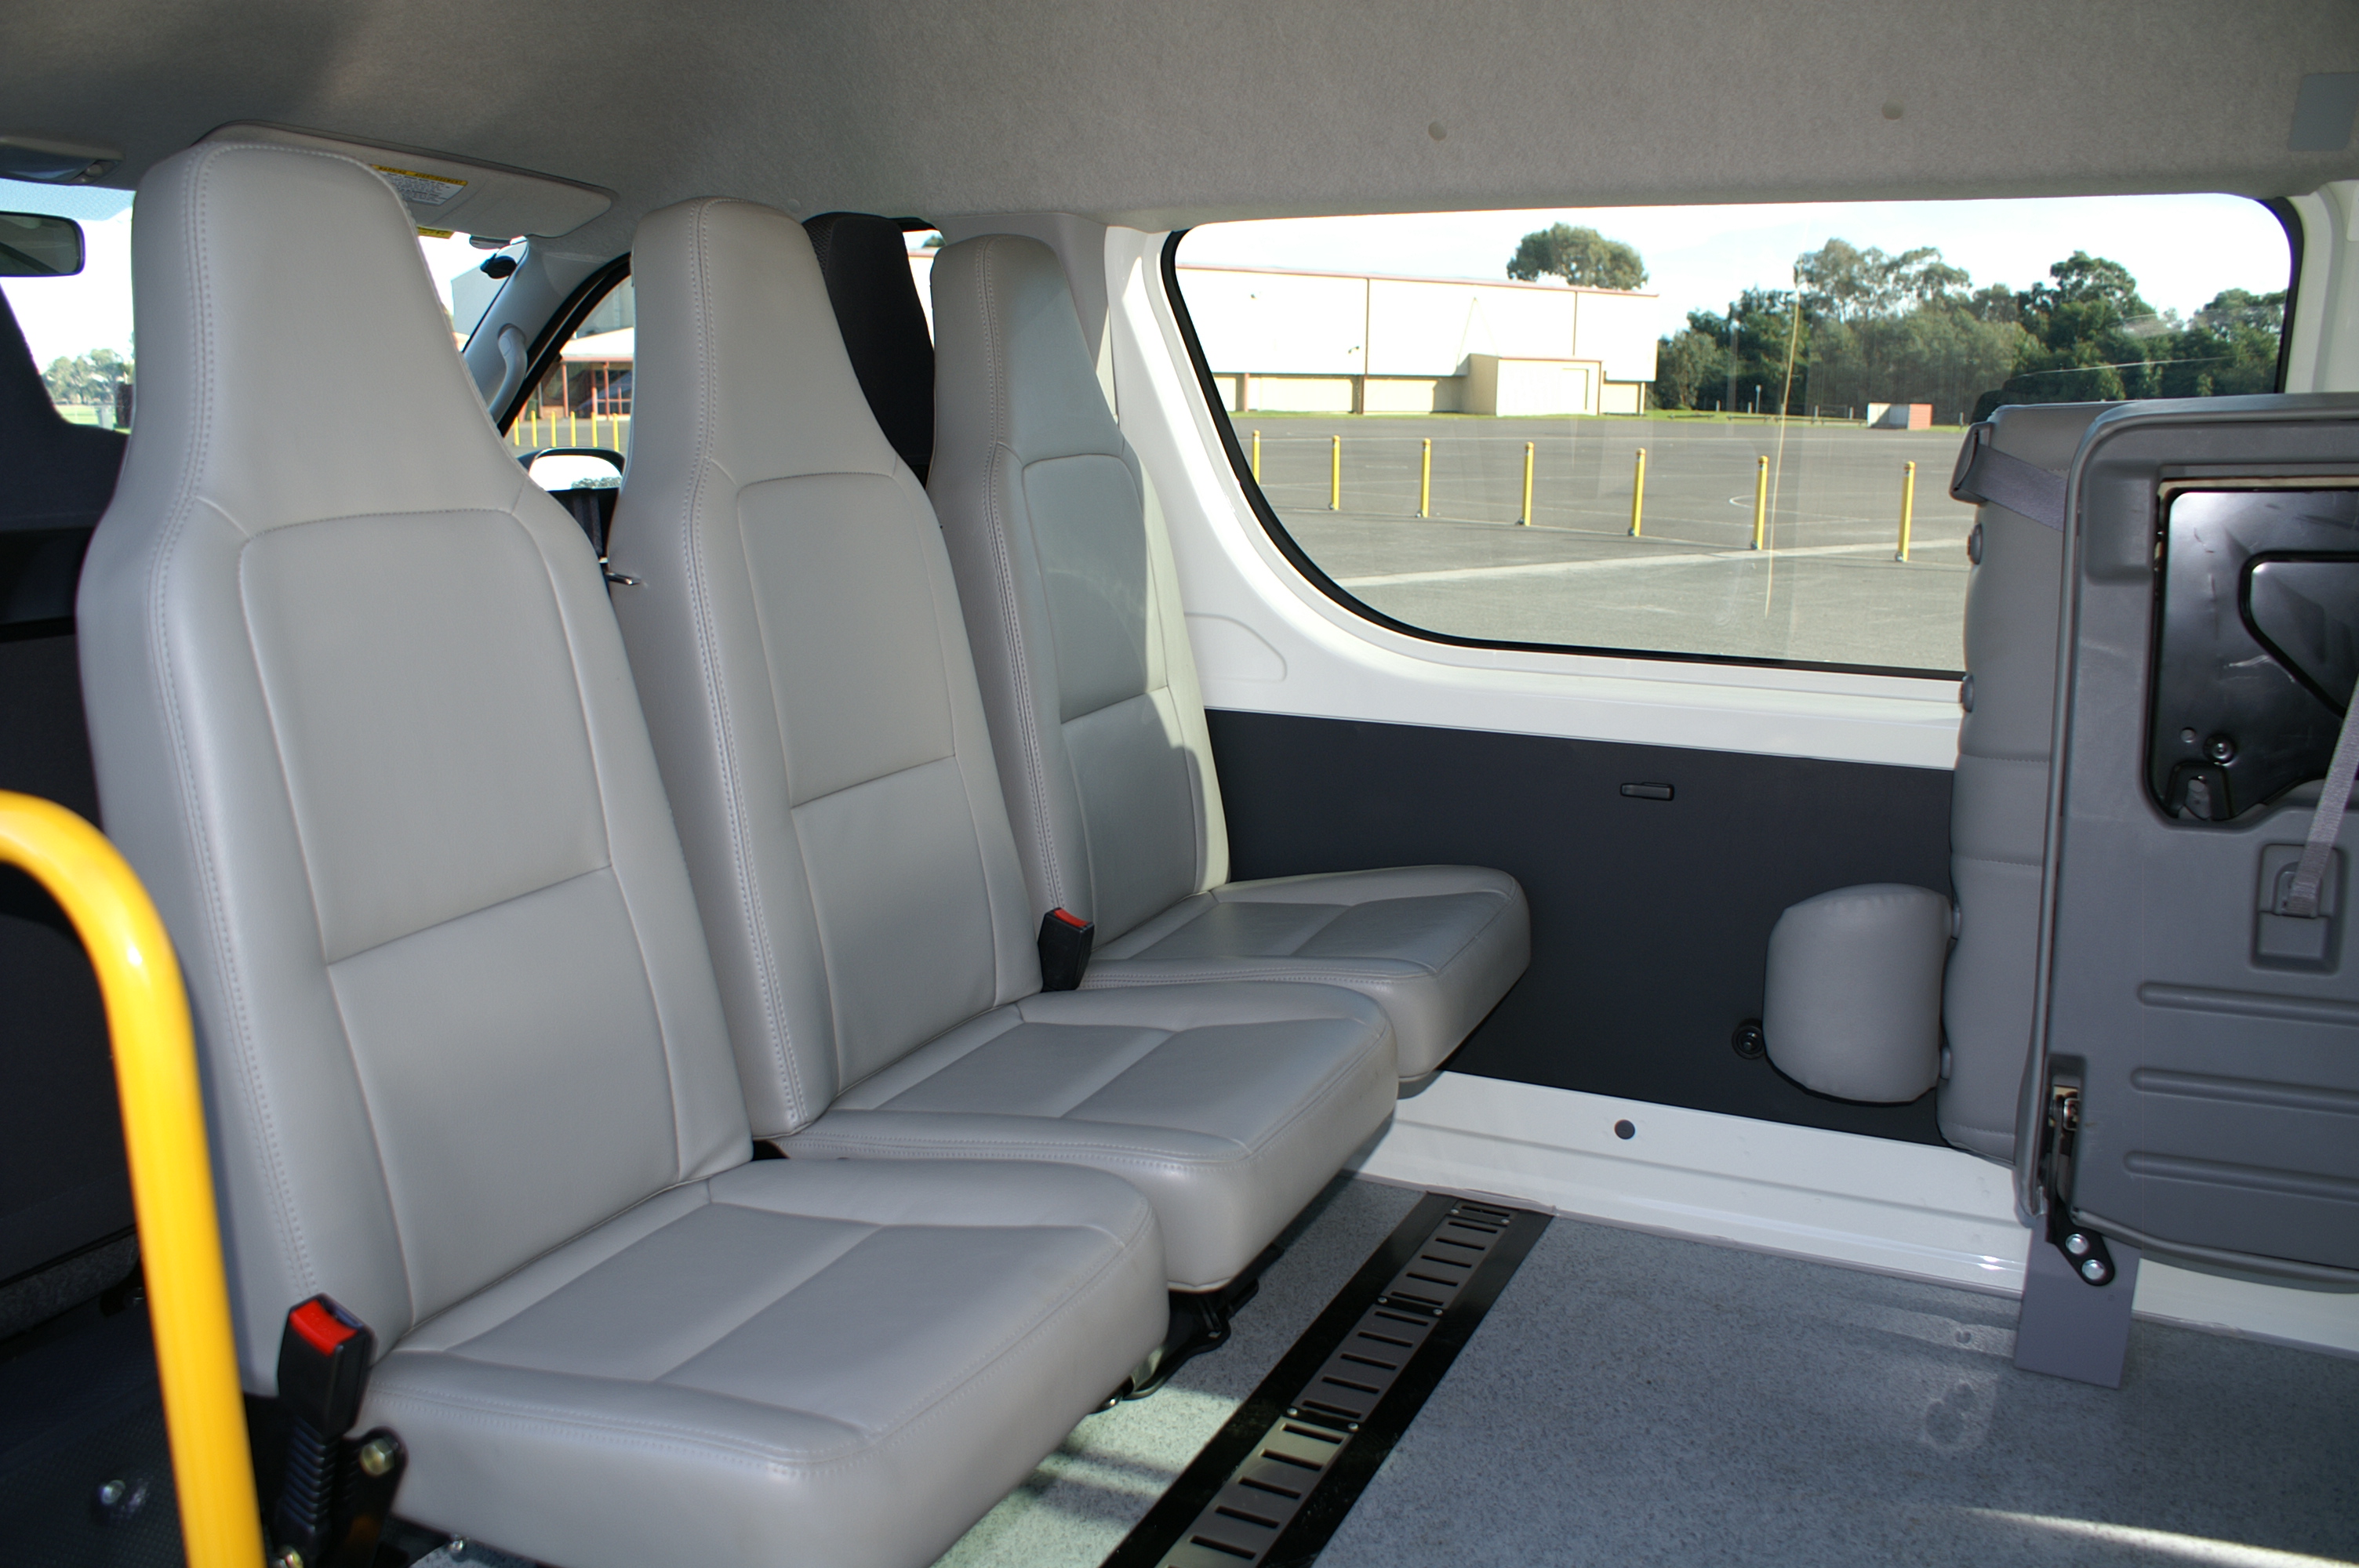 Vehicle Access Solutions: Seating arrangements